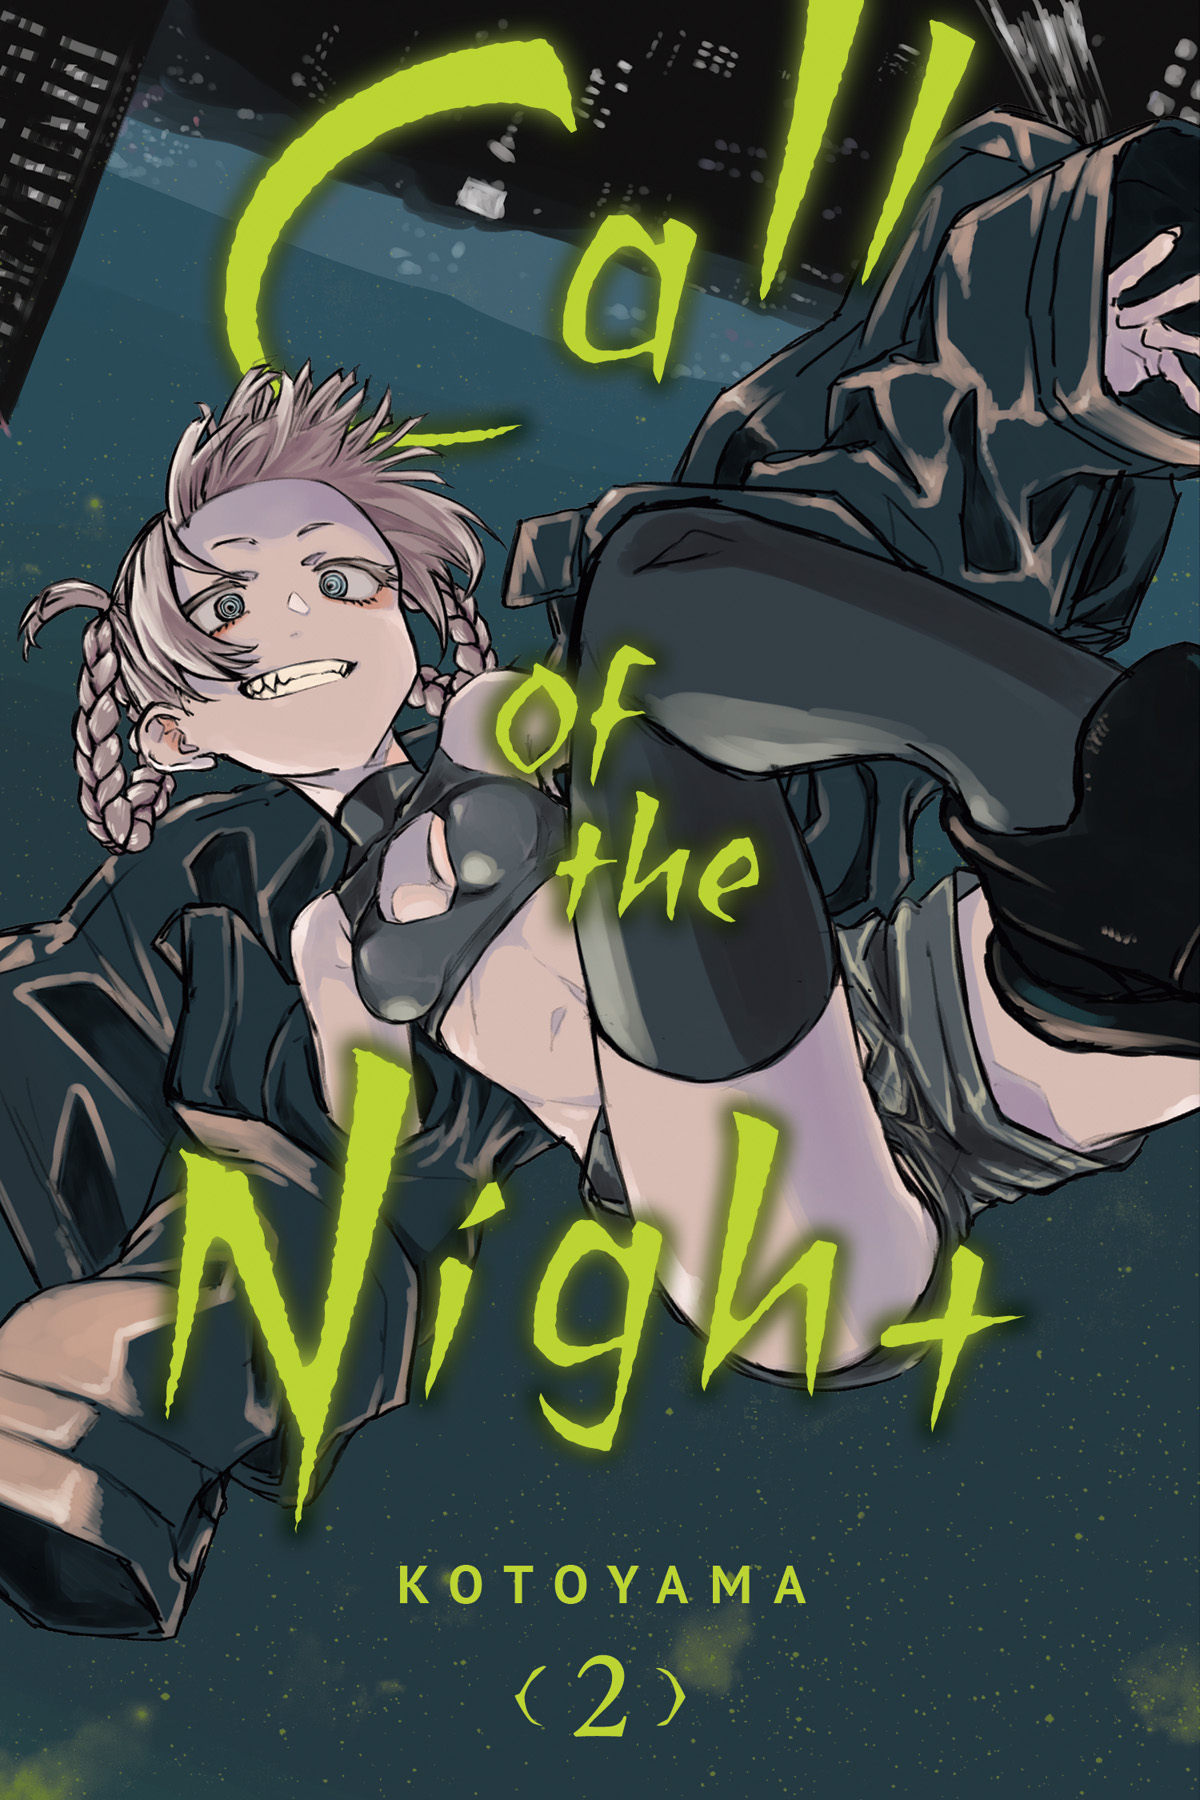 REVIEW: Call of the Night Vol. 1 Gives Its Insomniac-Vampire Romance a  Strong Start